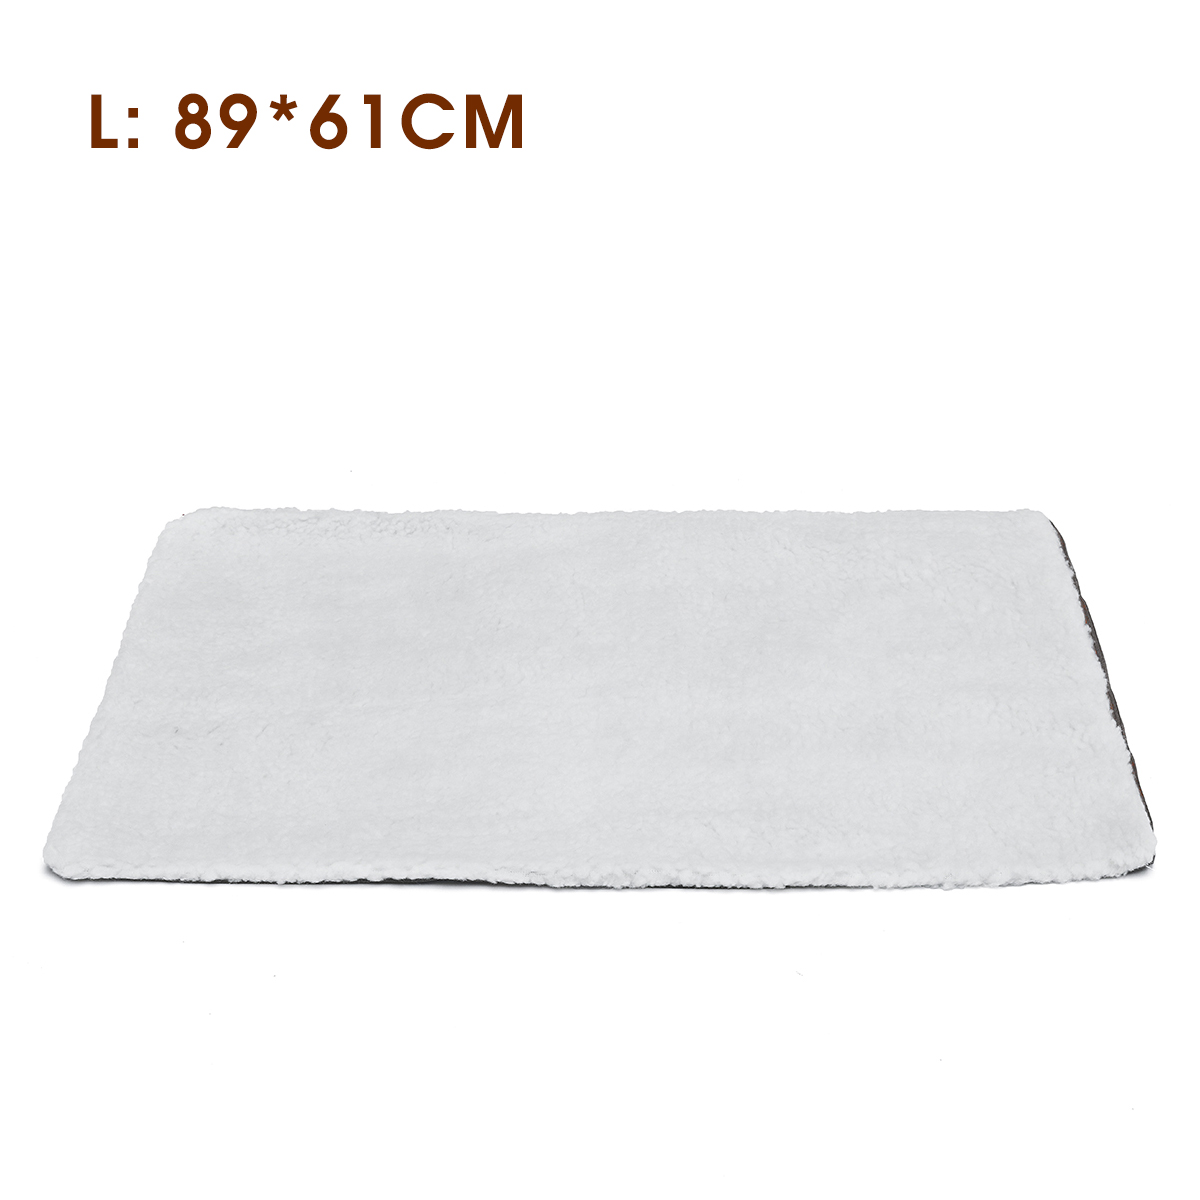 Large-Self-Heating-Dog-Bed-Fleece-Mat-Soft-Warm-Pet-Cat-Rug-Thermal-Washable-Pad-1567815-10